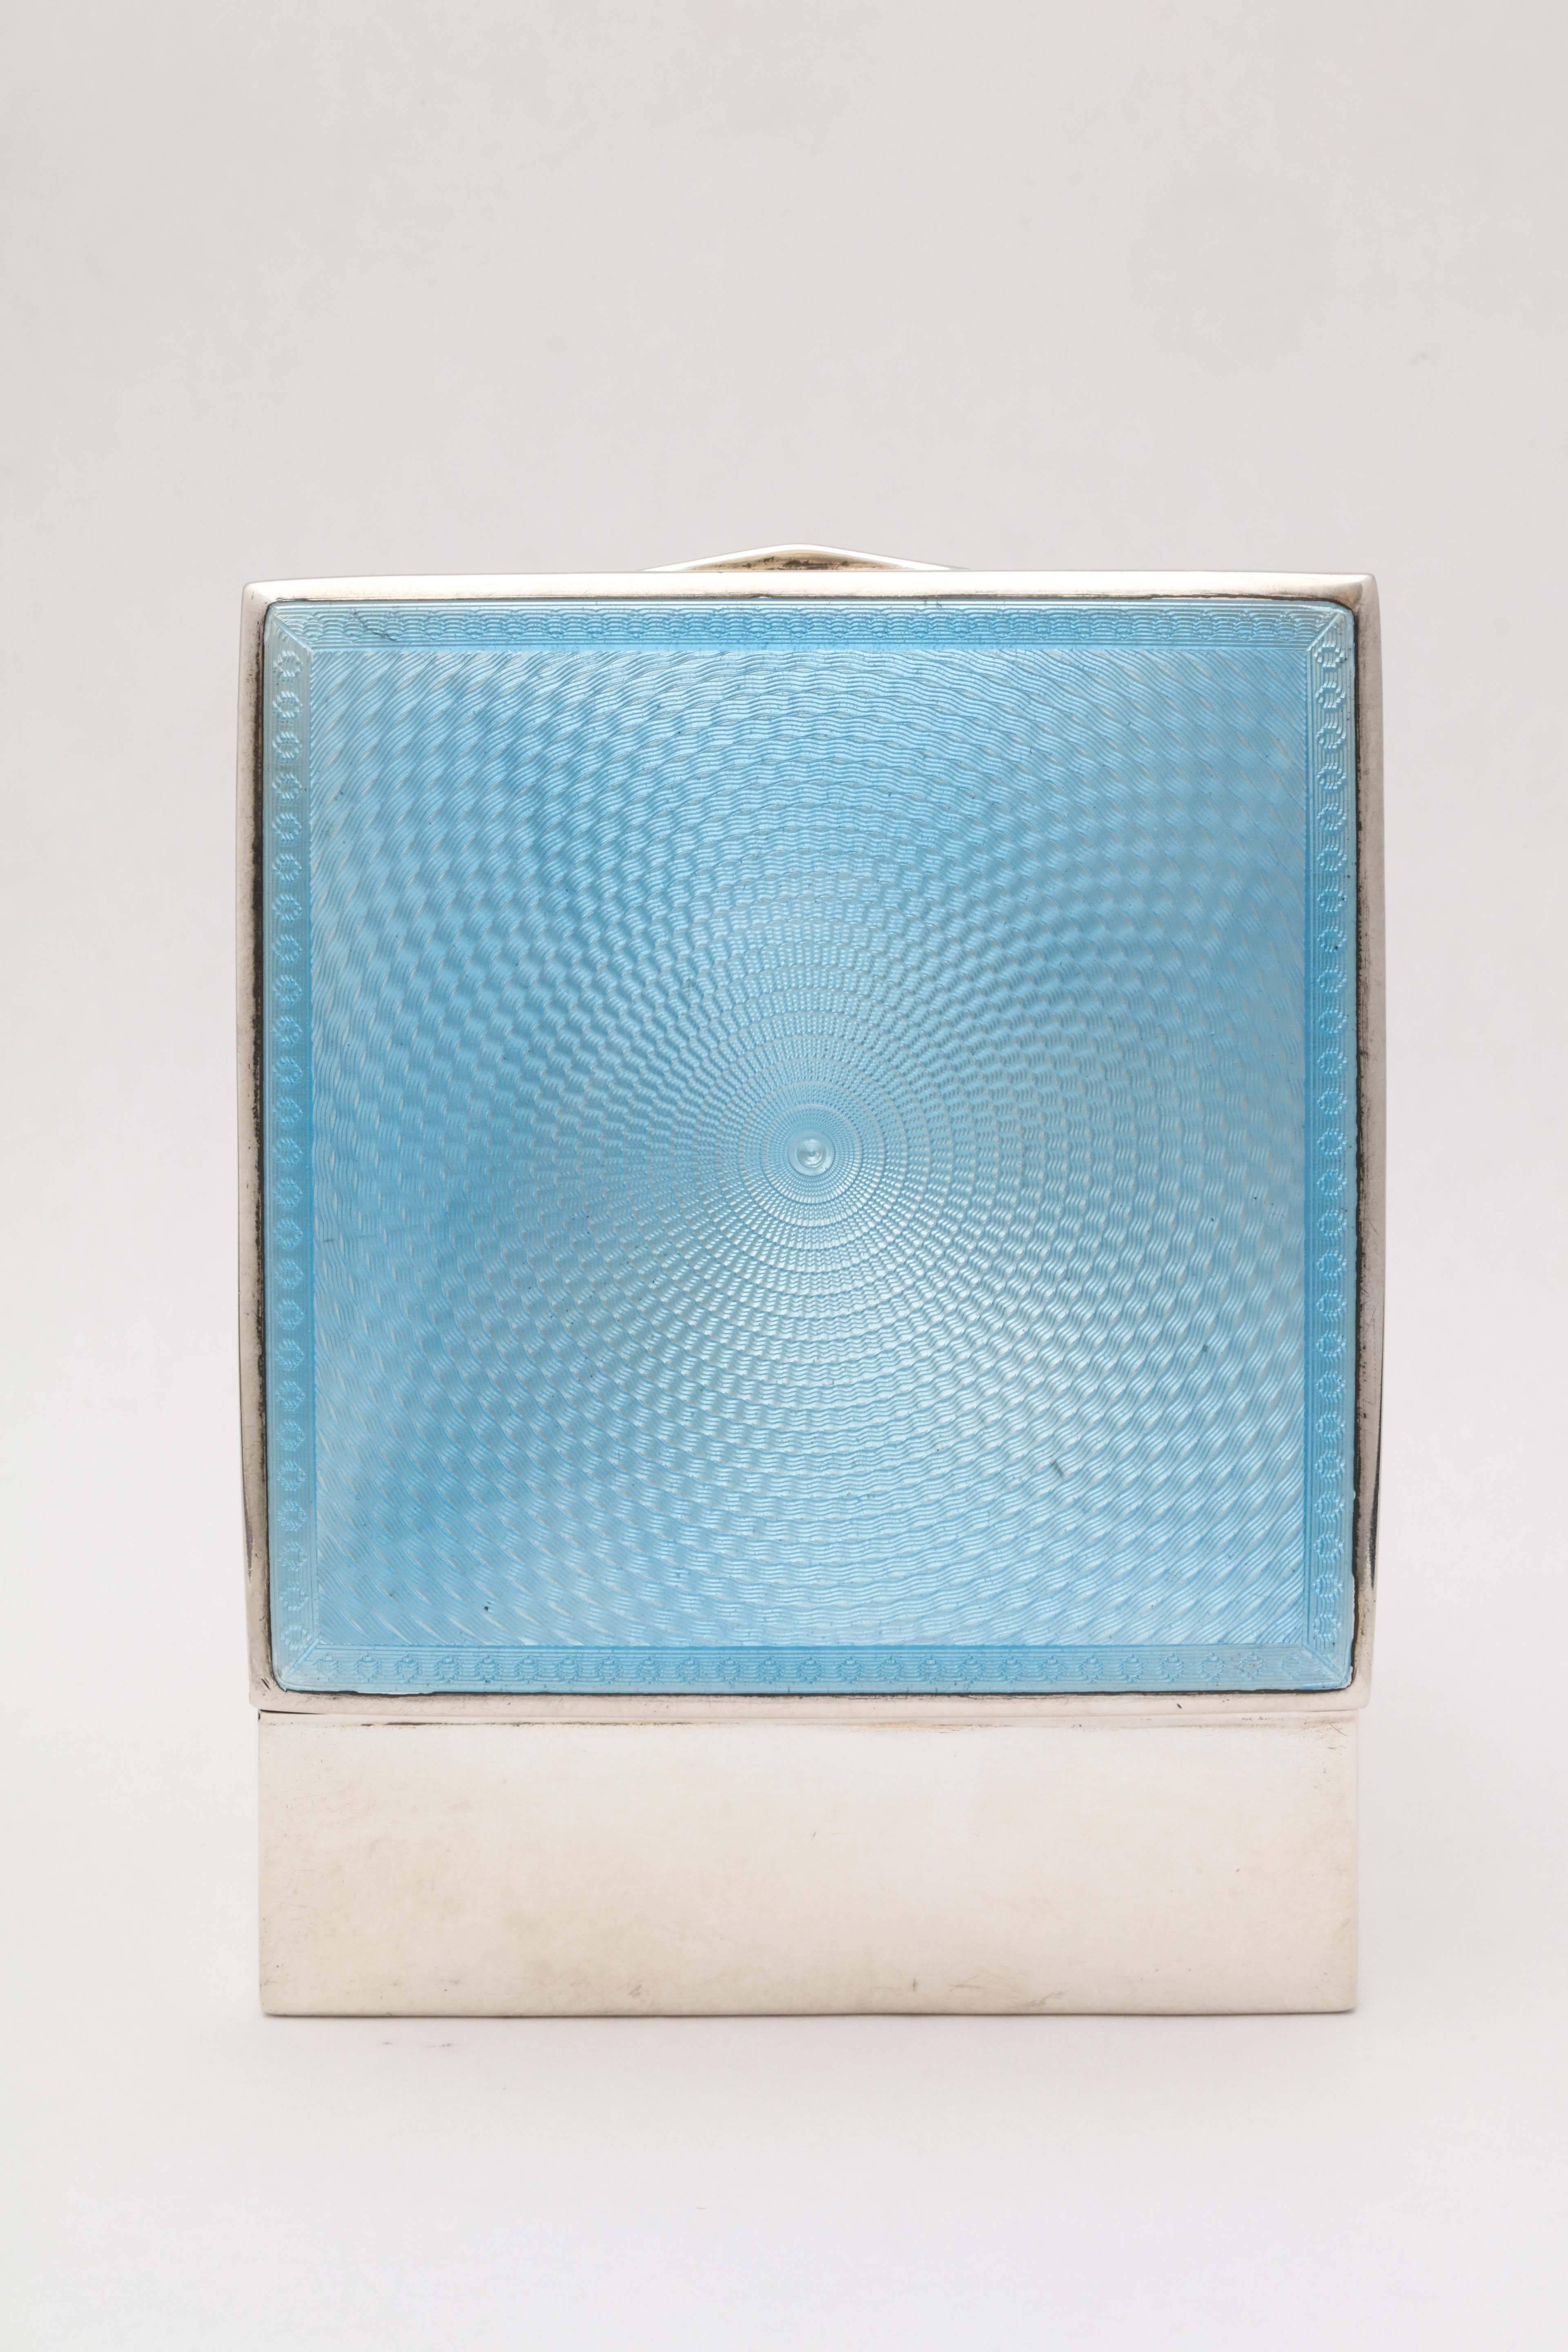 Mid-20th Century Art Deco Sterling Silver and Blue Guilloche Enamel Table Box